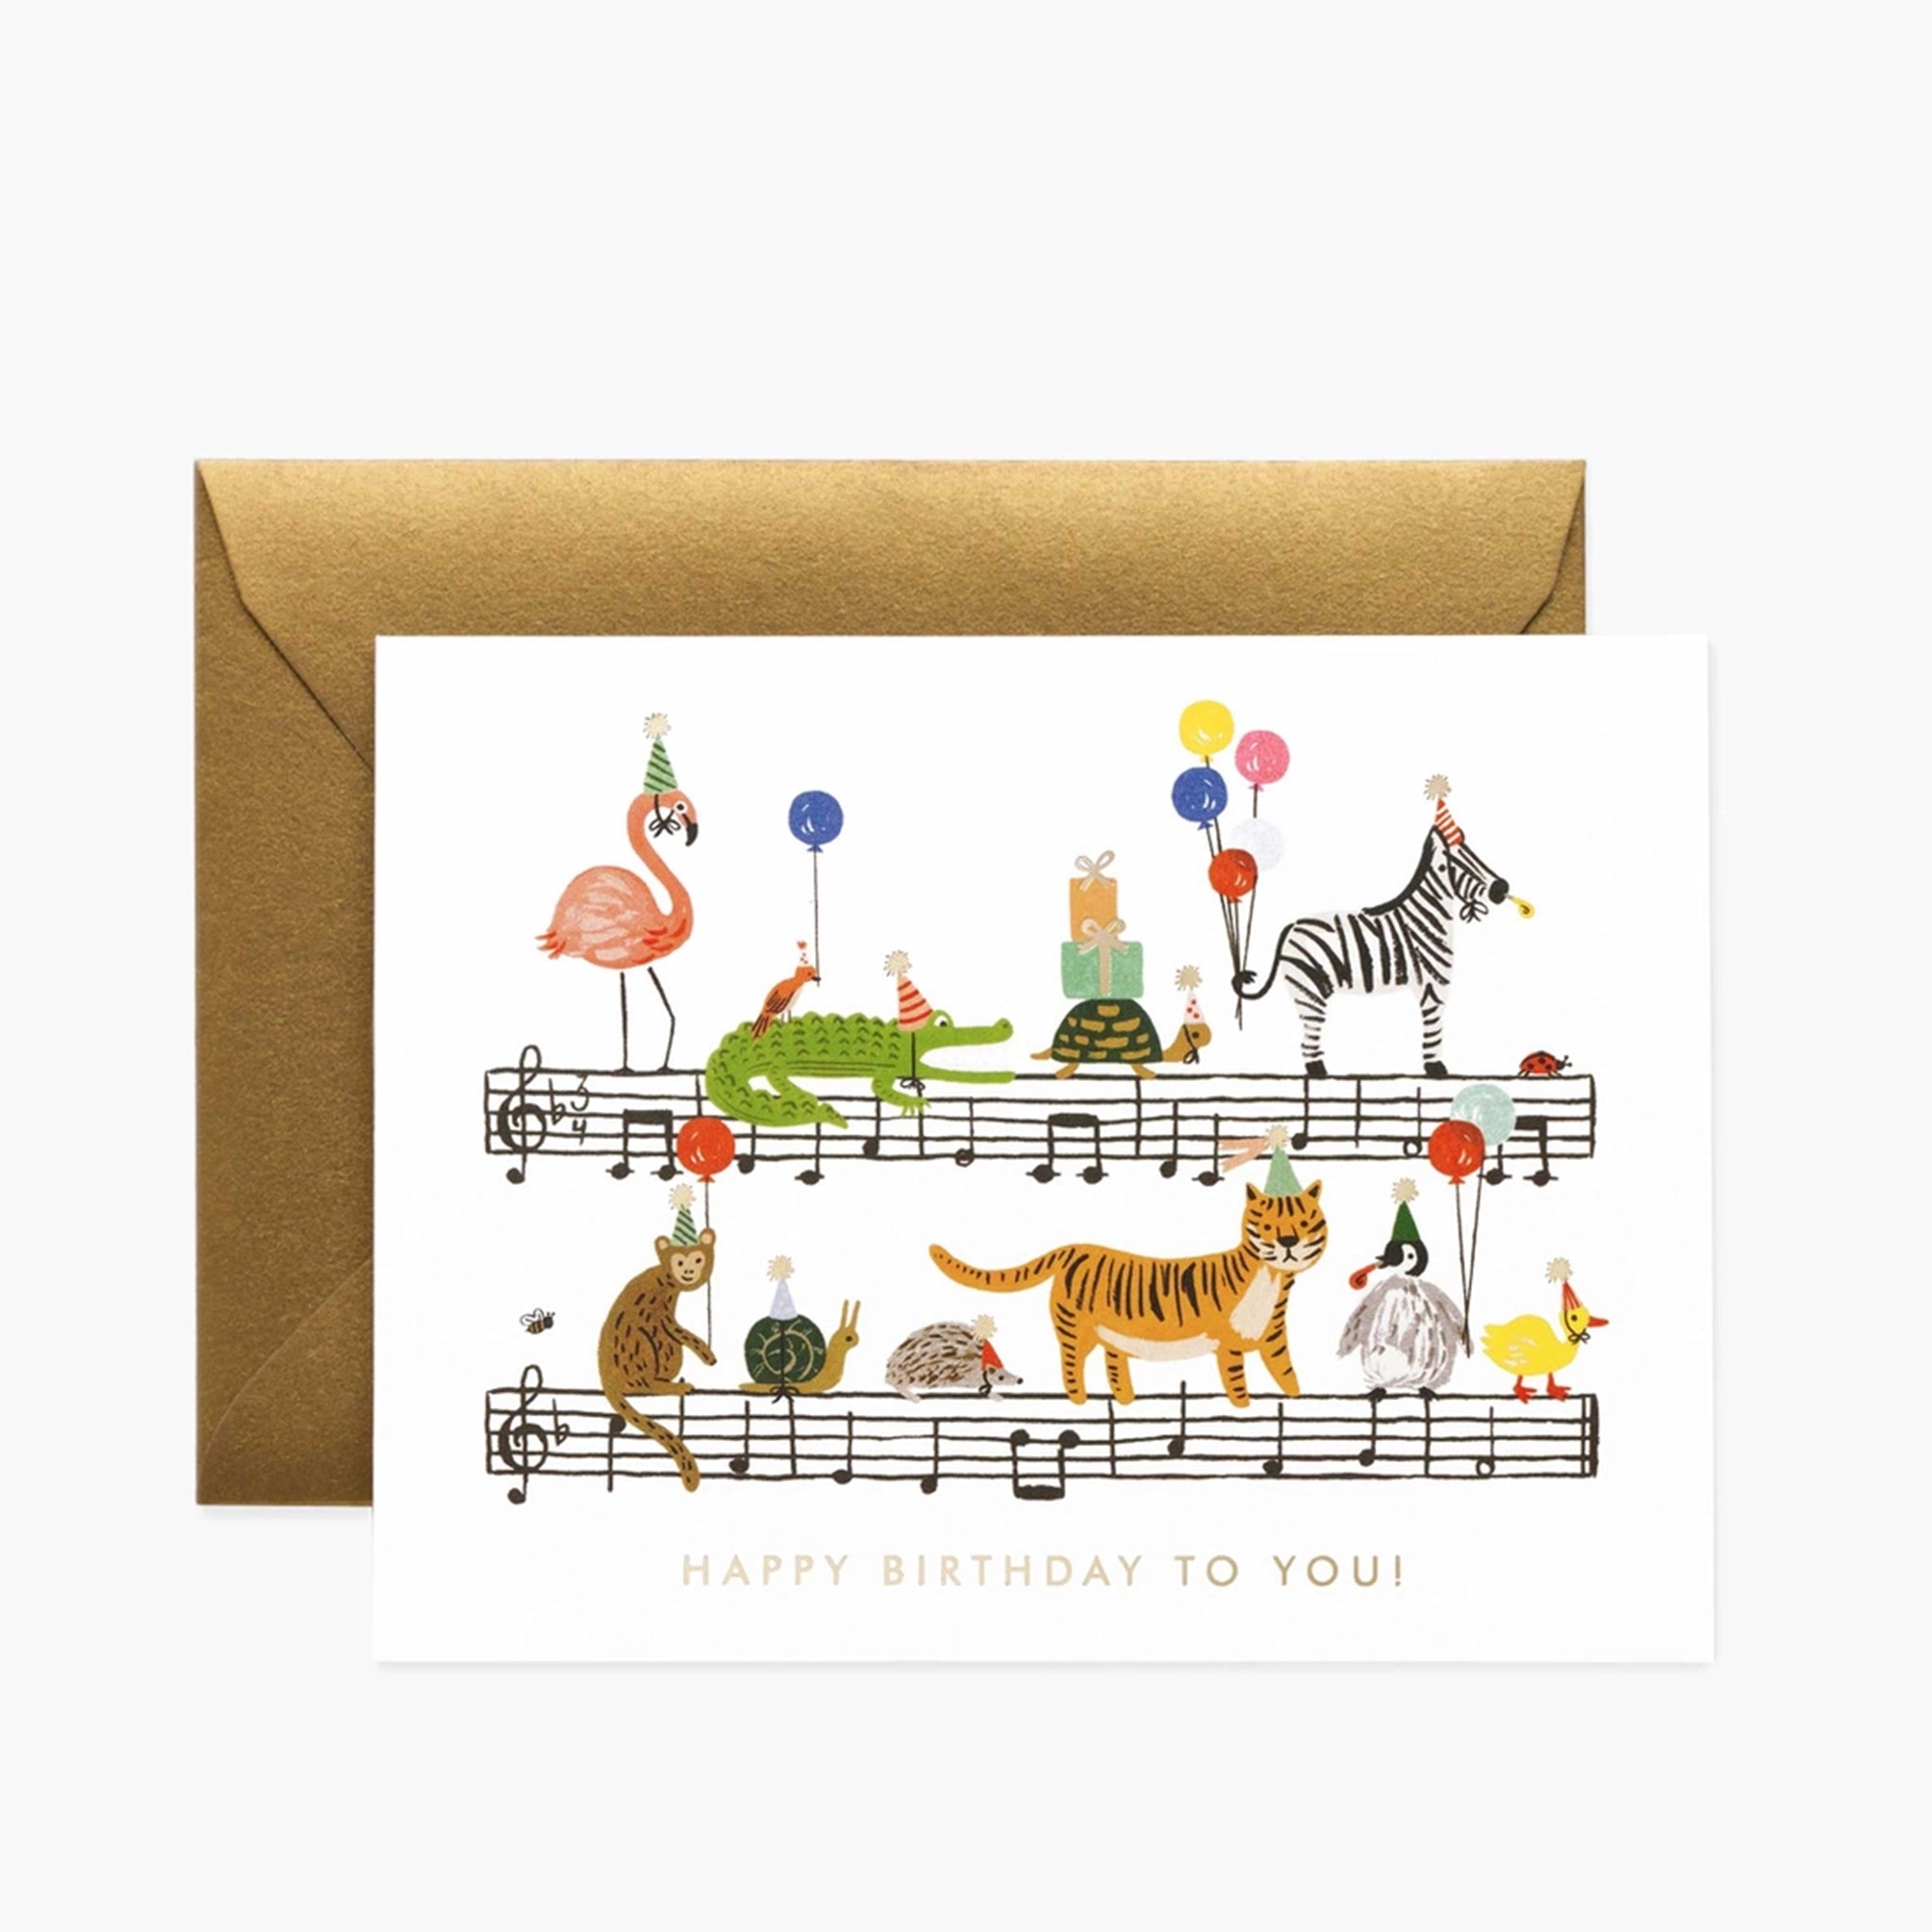 On a white background is a white card with an illustration of animals with party hats and balloons standing along bars of music and gold text at the bottom that reads, "Happy Birthday To You!".